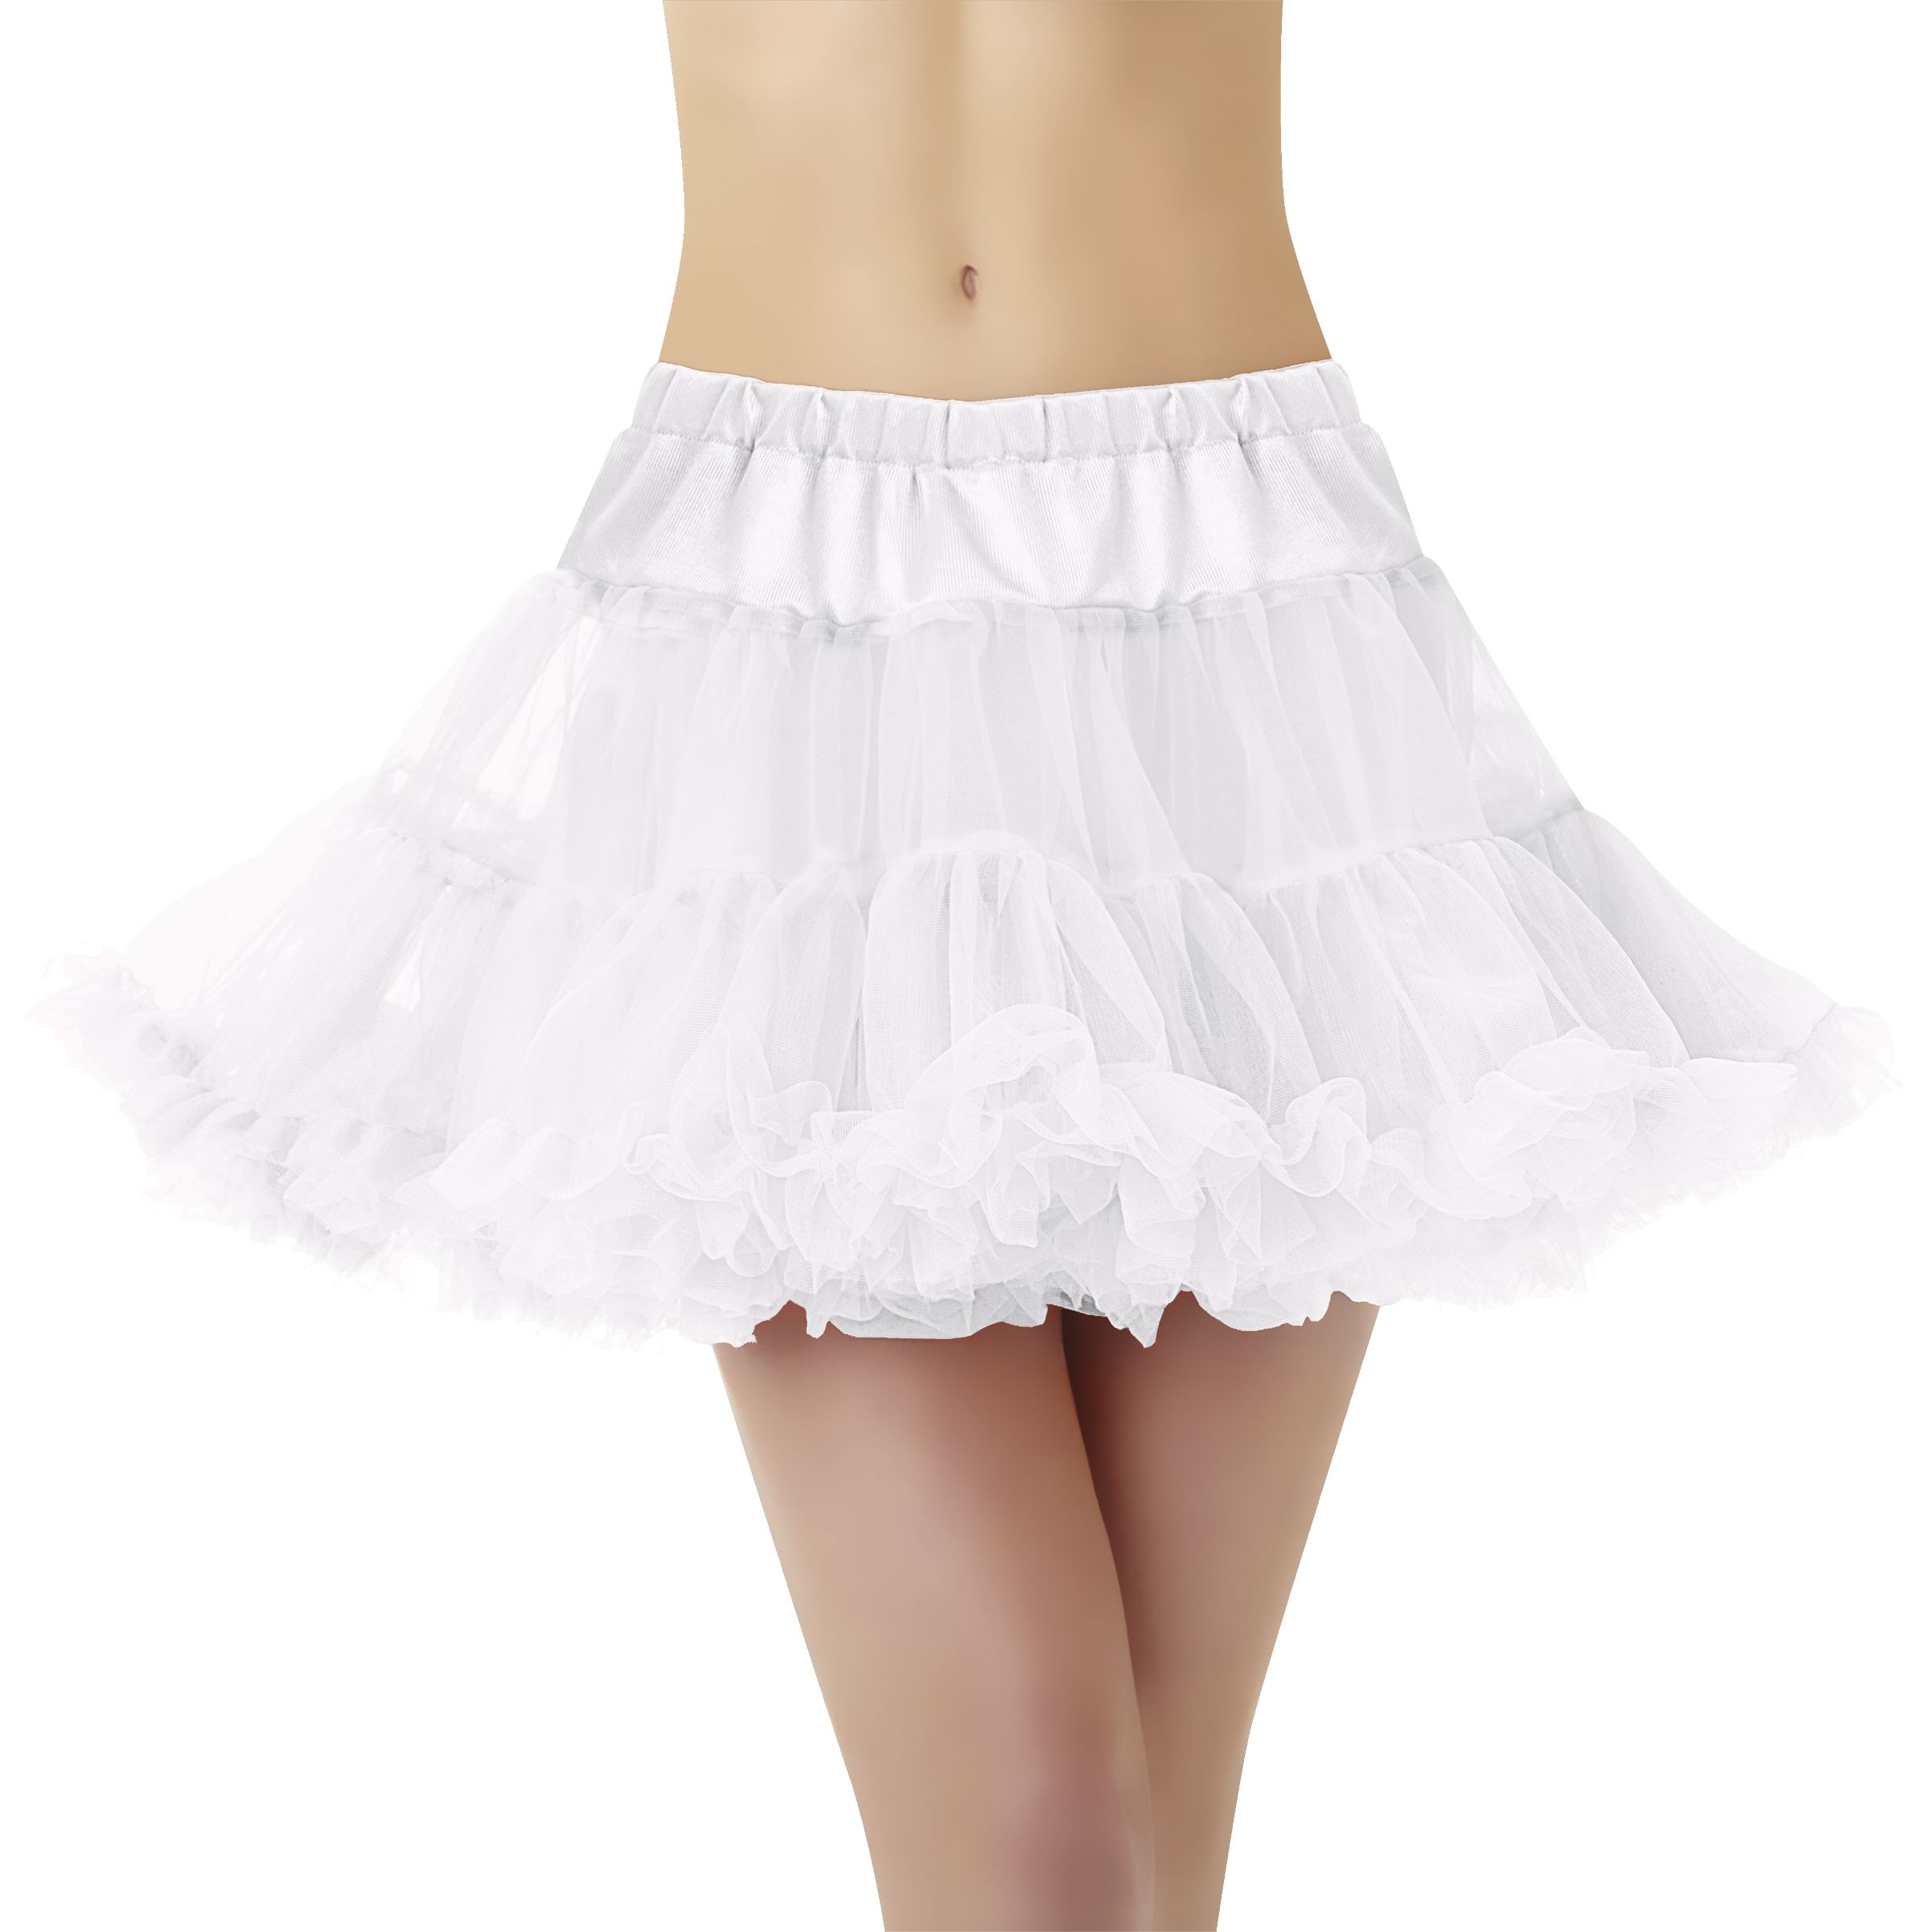 Adult Tulle Petticoat Skirt, White, One Size, Wearable Costume